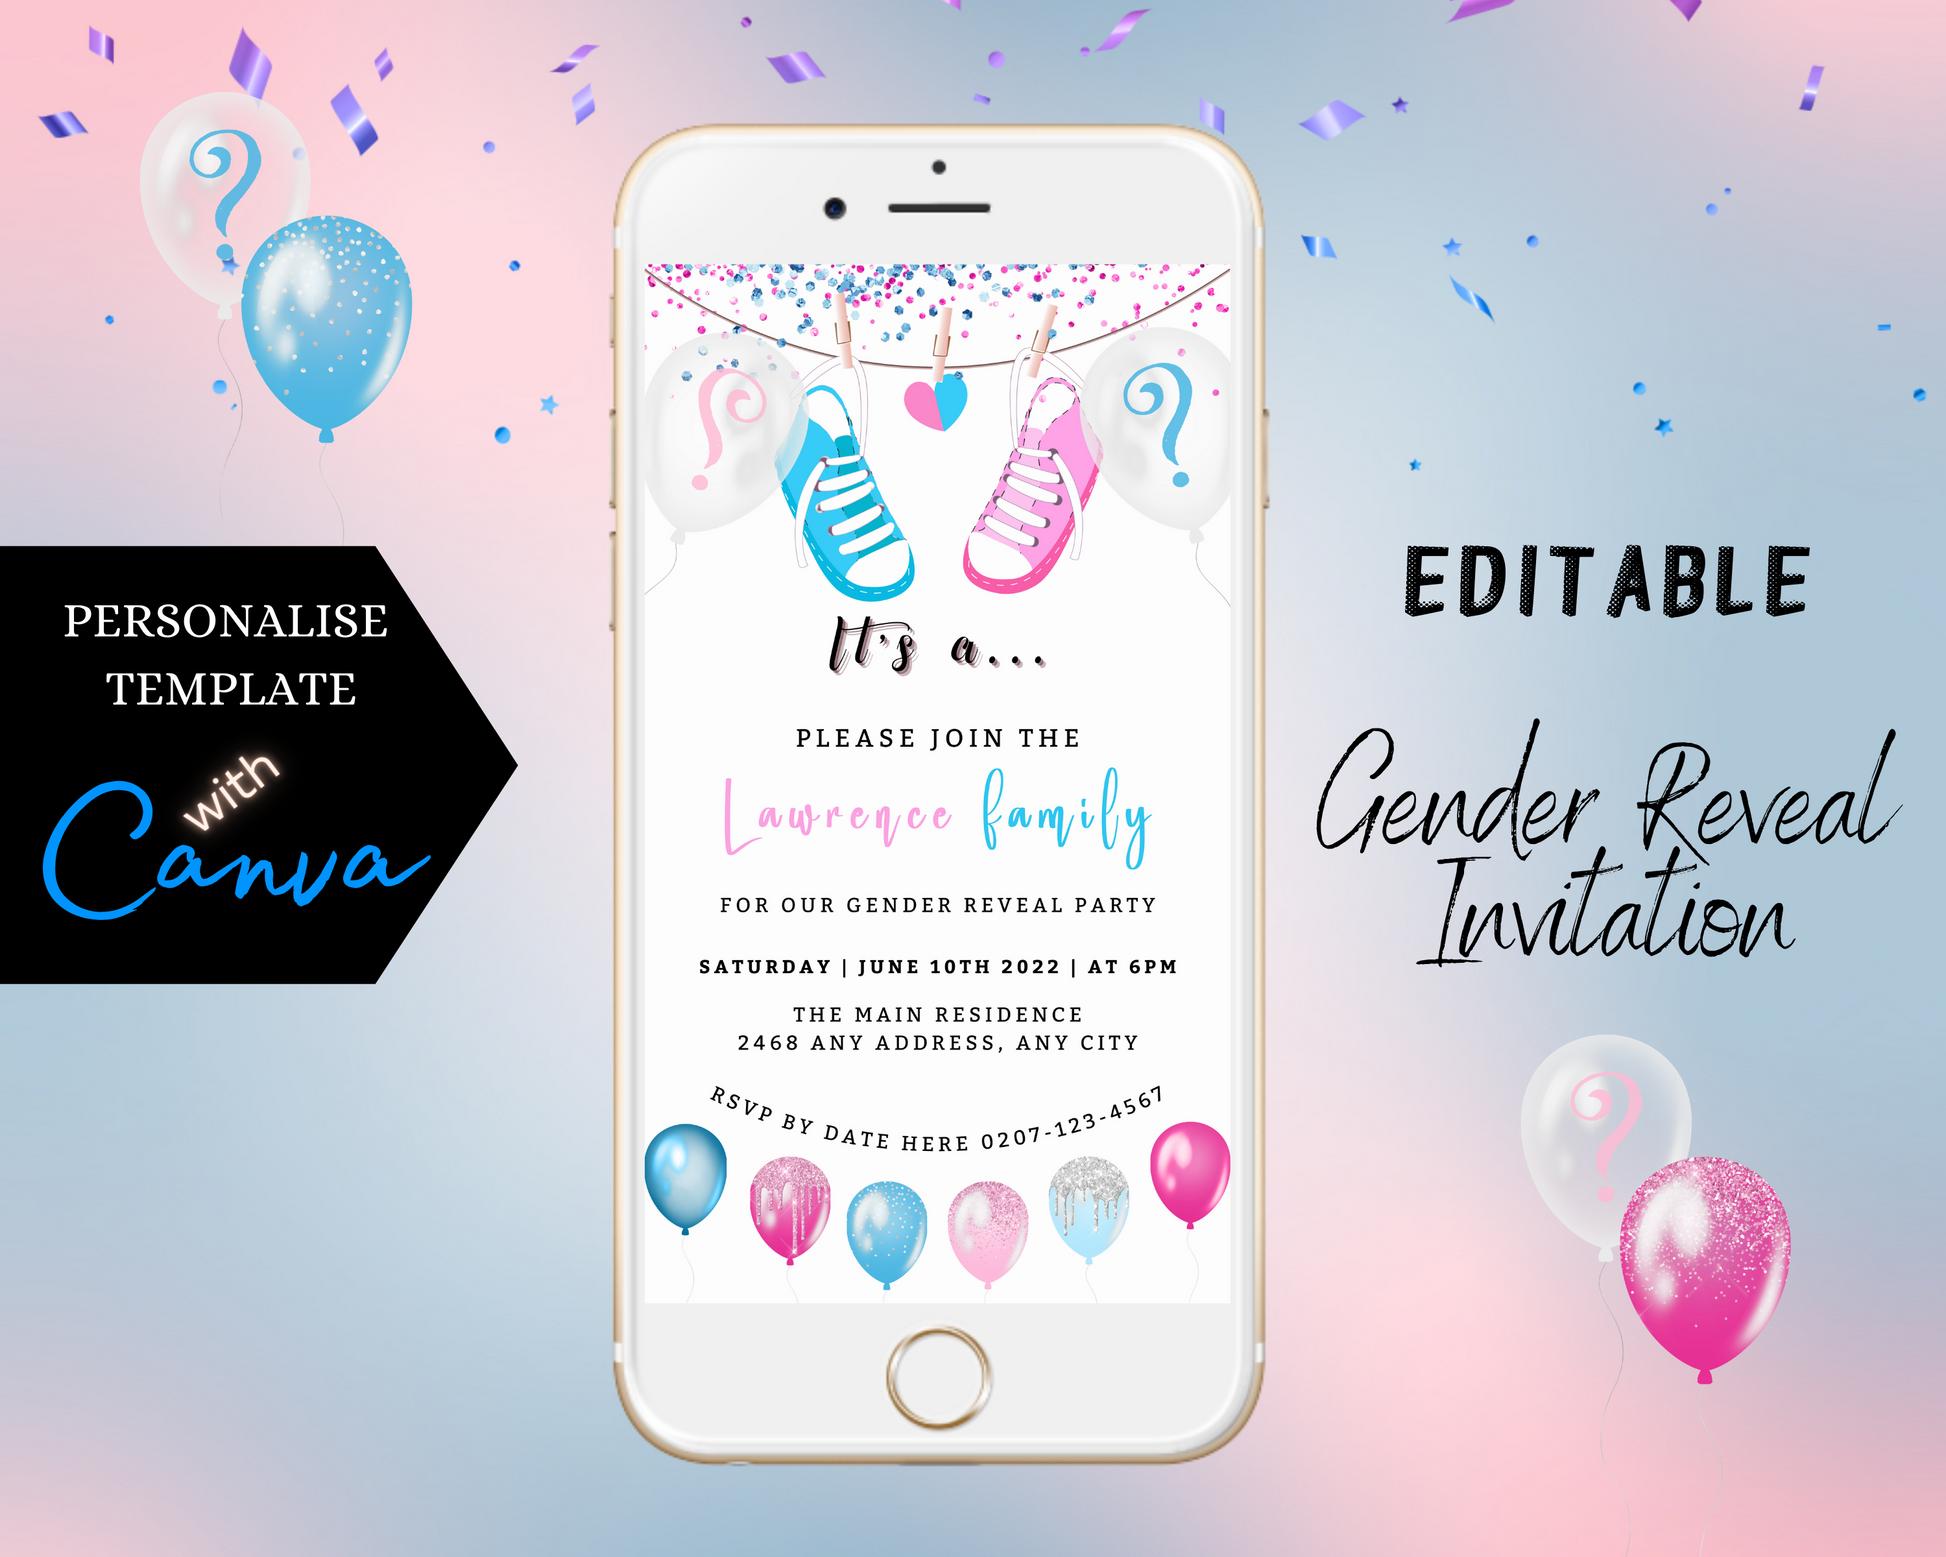 A digital baby shower invitation on a smartphone featuring customizable pink and blue baby shoes and balloons for a gender reveal.